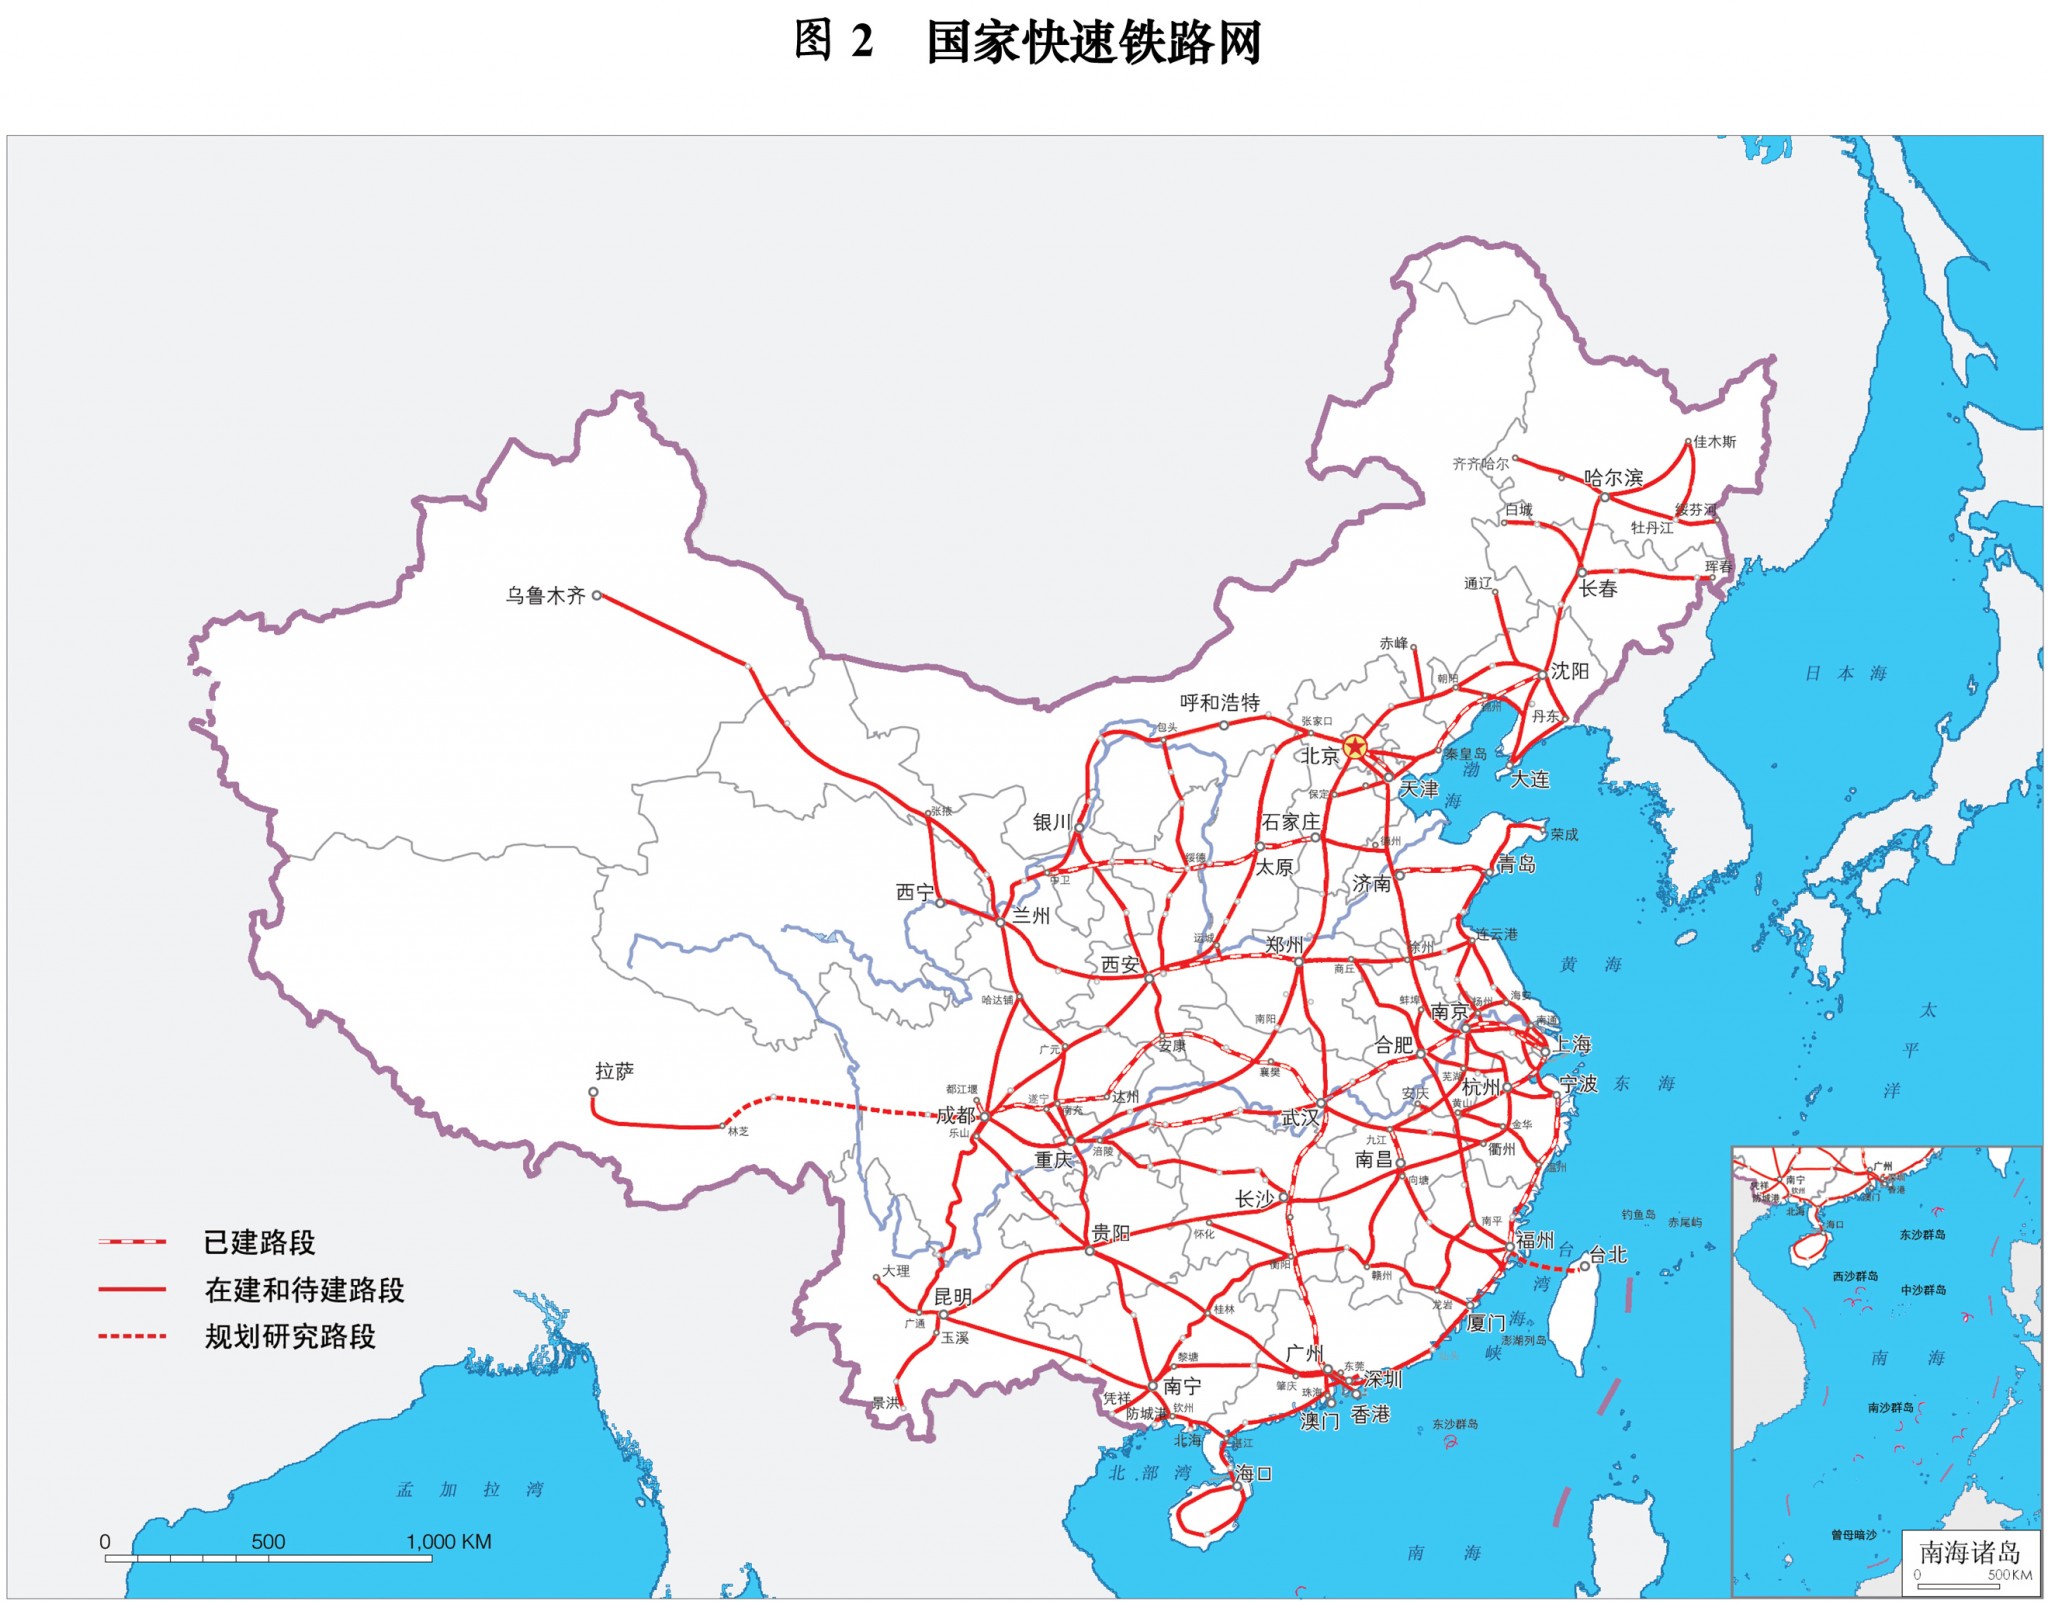 Railroad Lines in China